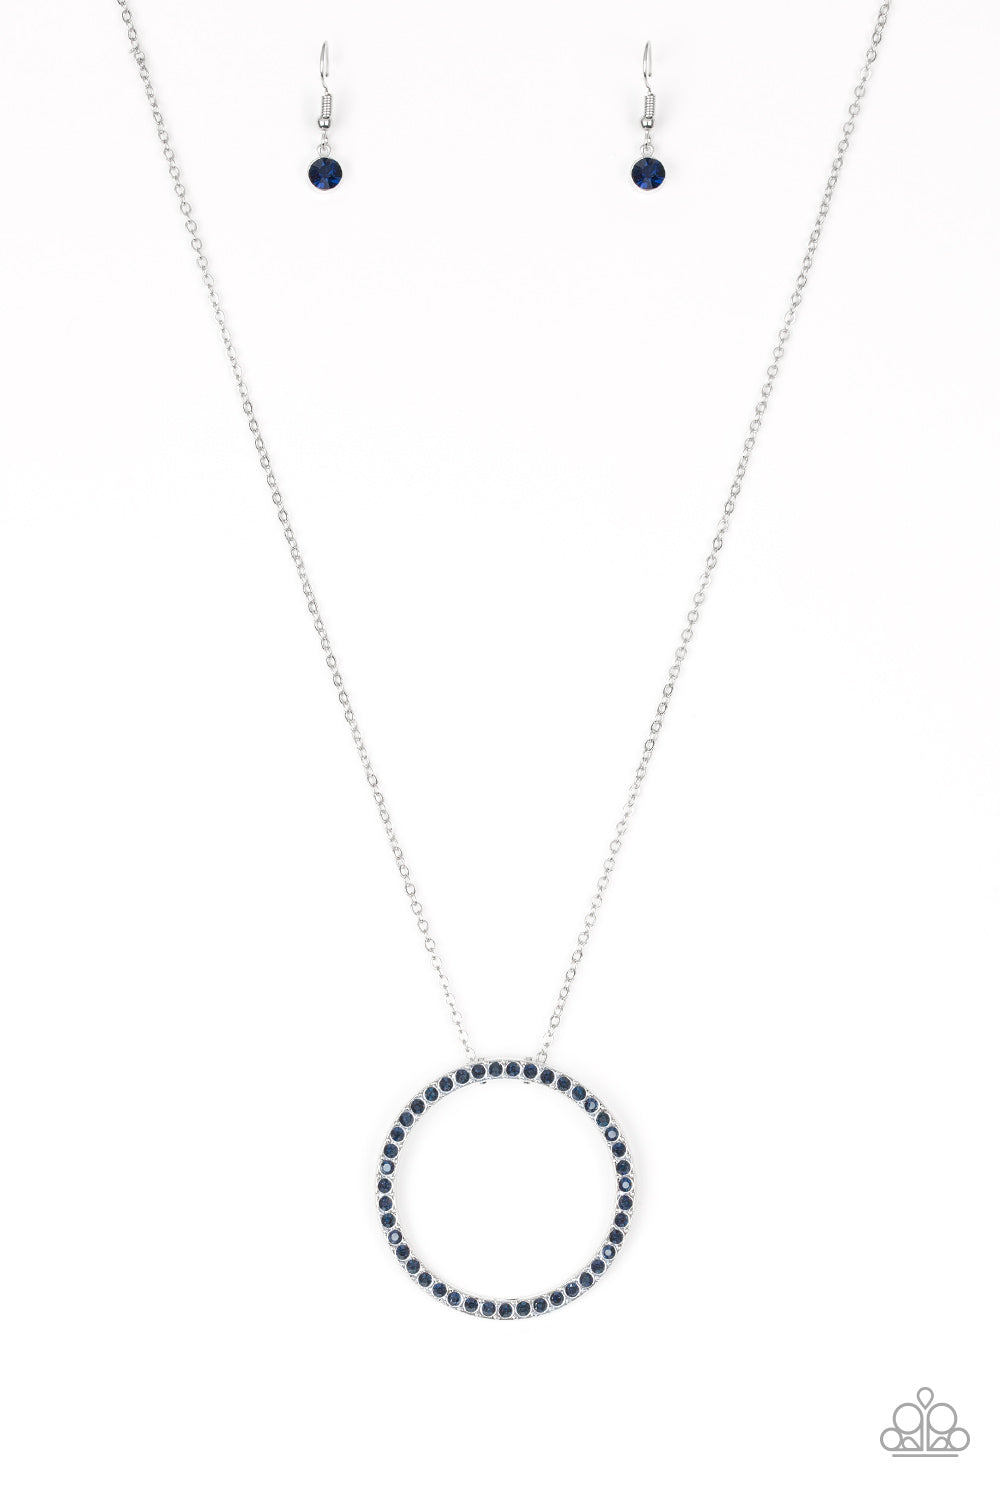 Paparazzi Accessories  - Center Of Attention - Blue Necklace